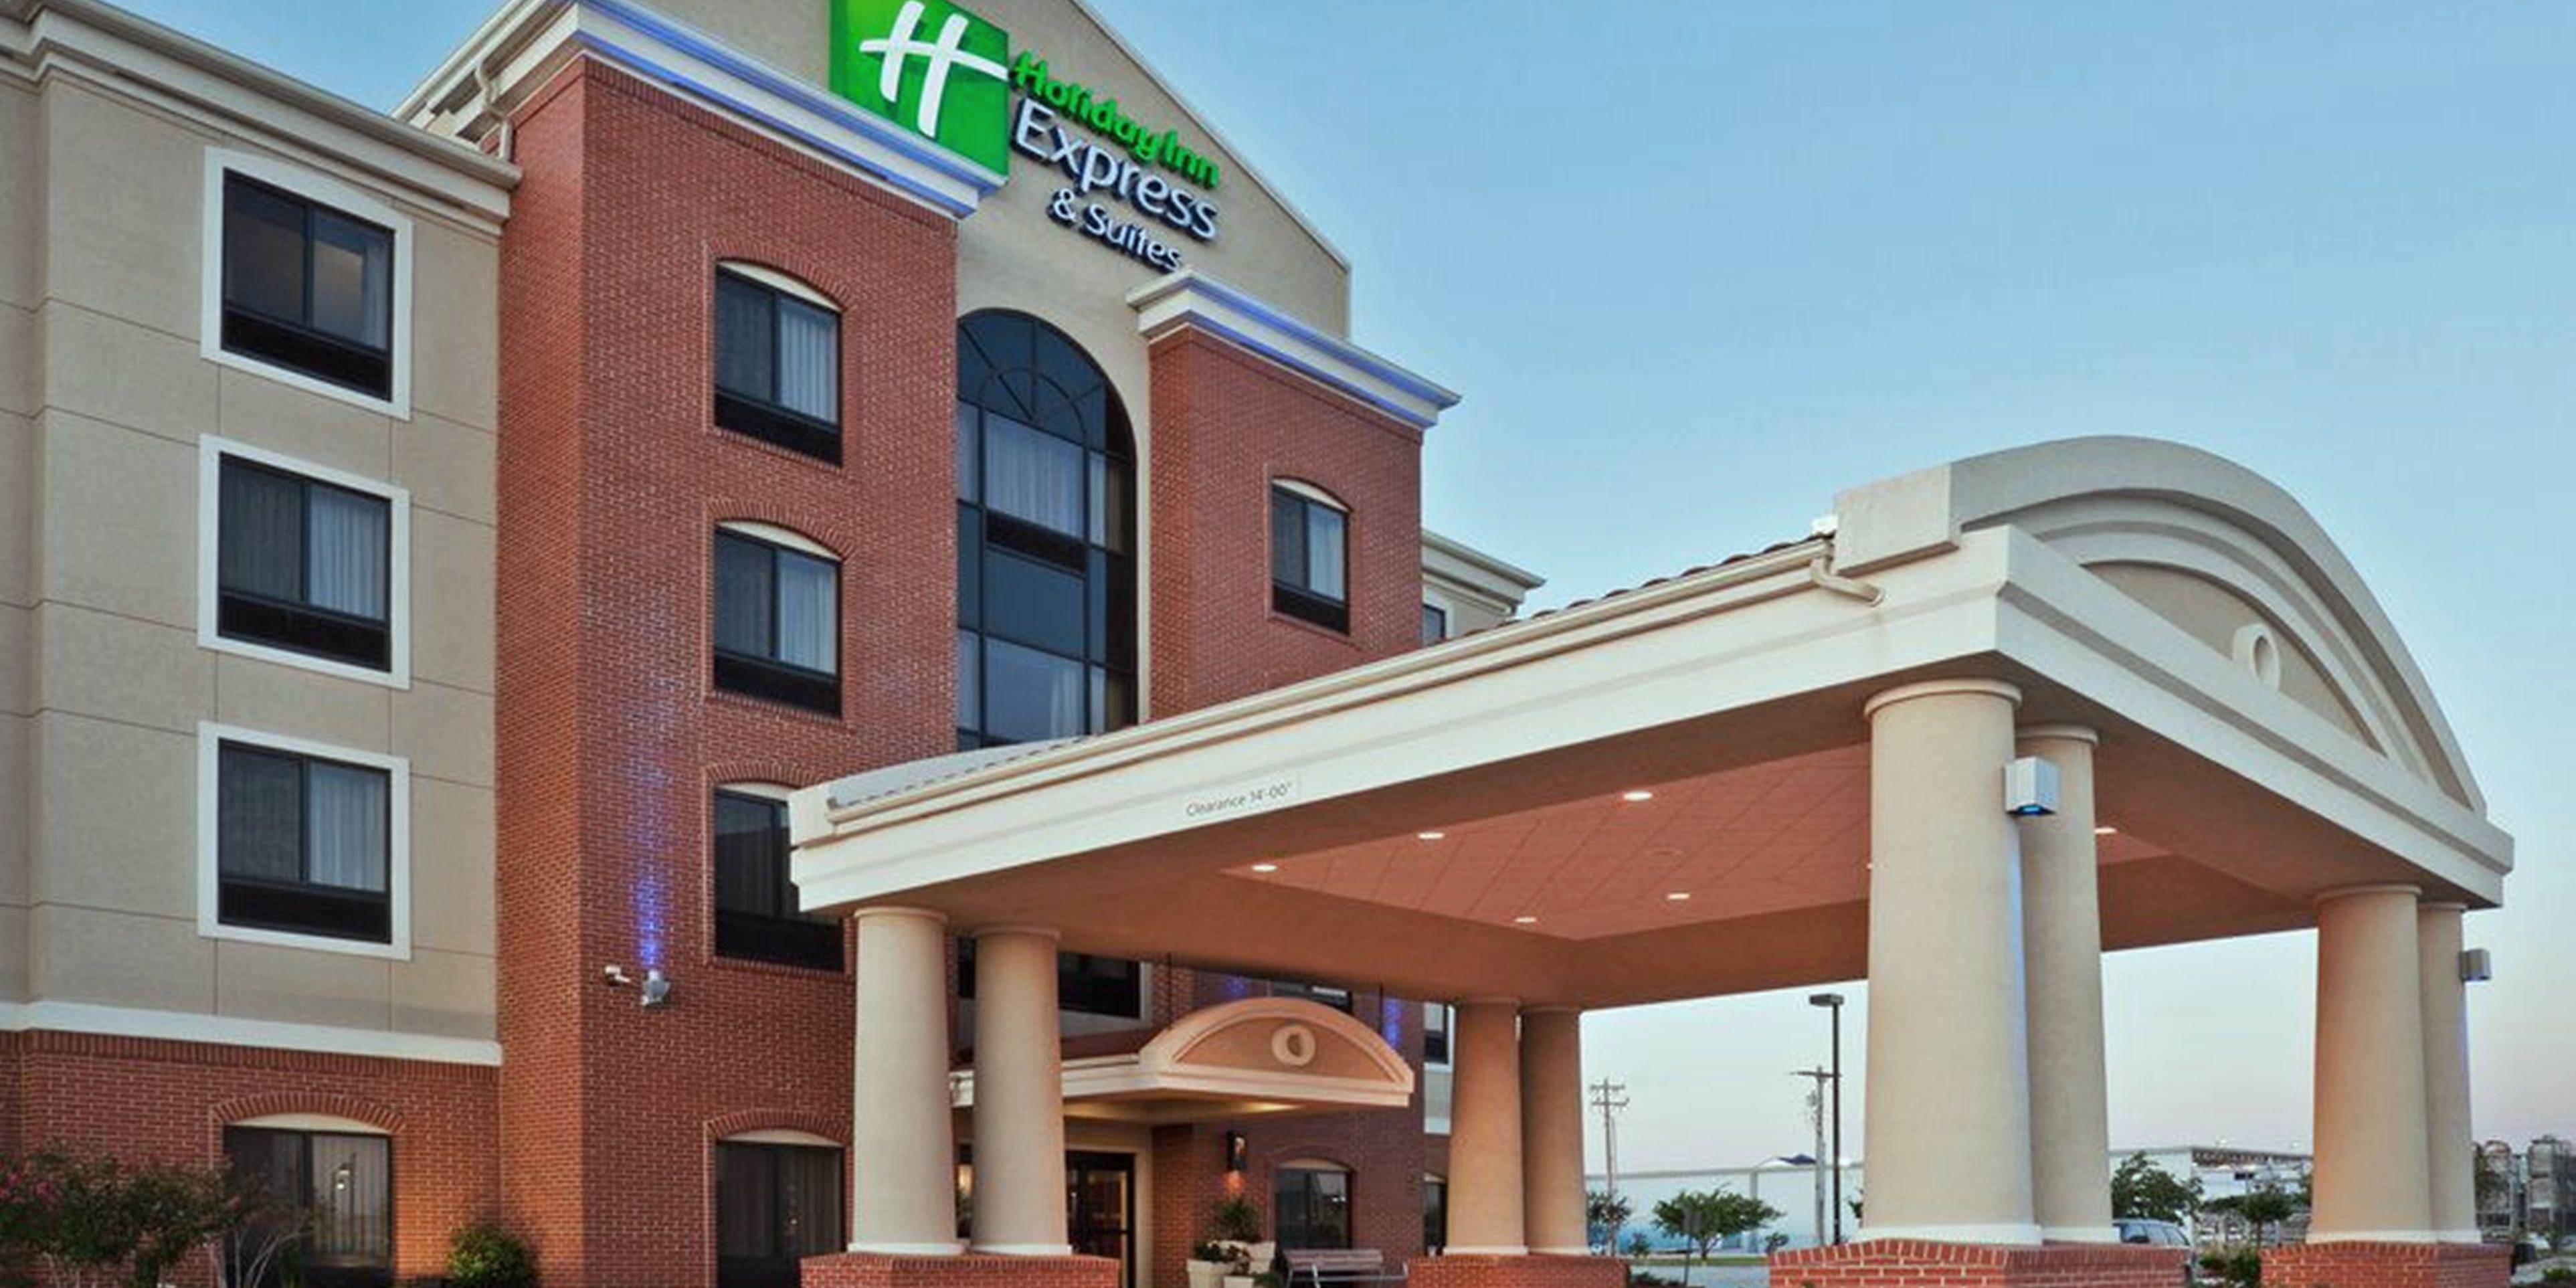 Hotels in Greensburg, PA Holiday Inn Express & Suites Greensburg